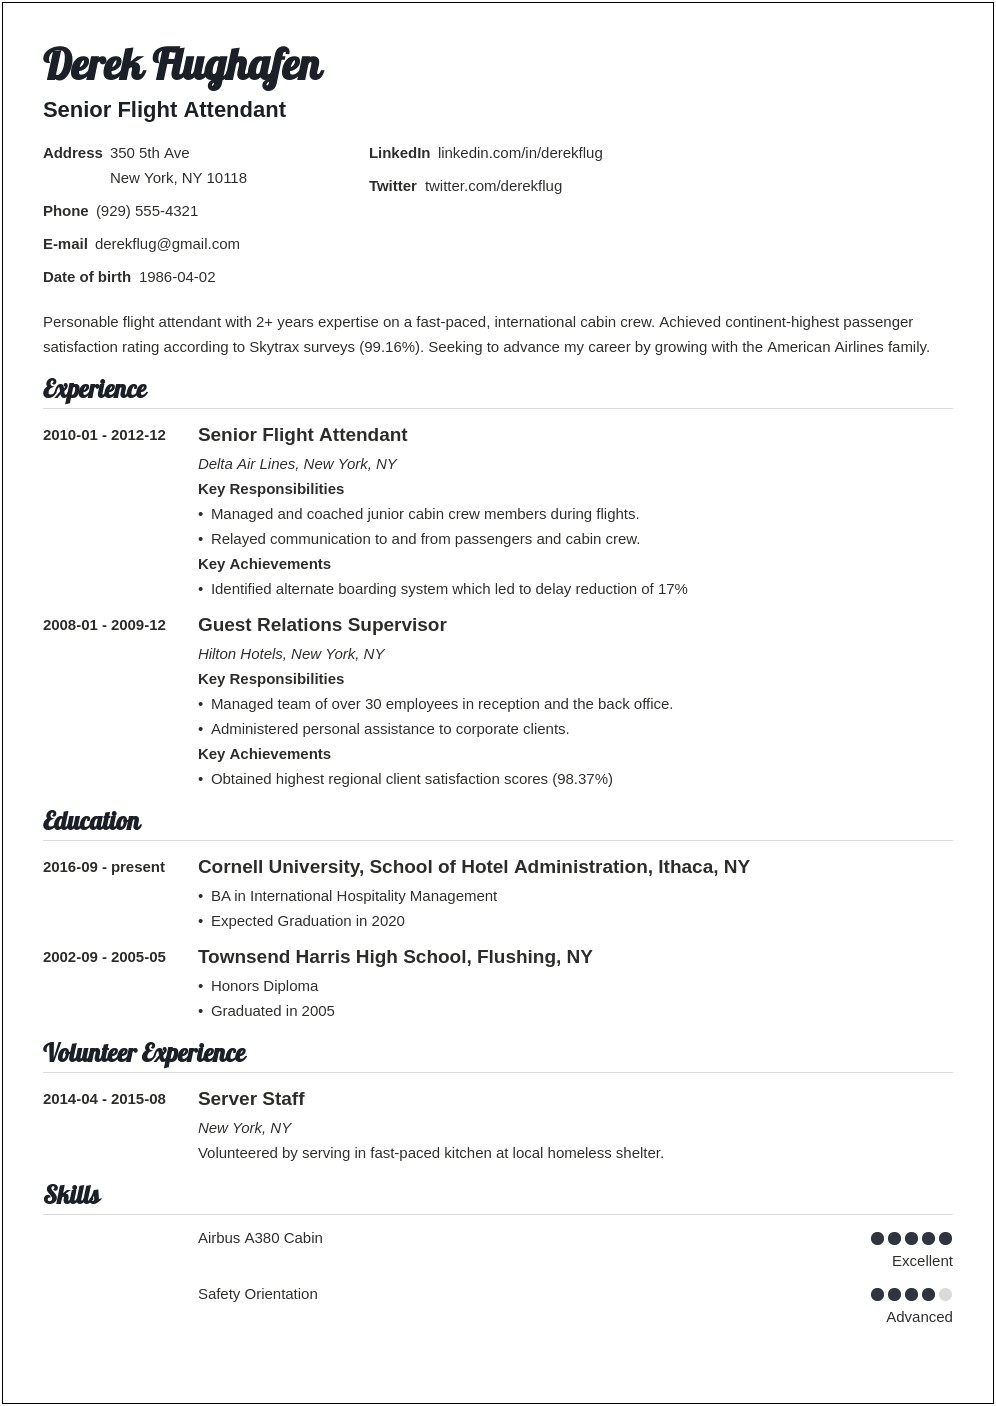 Resume Tailored For Airline Industry No Experience